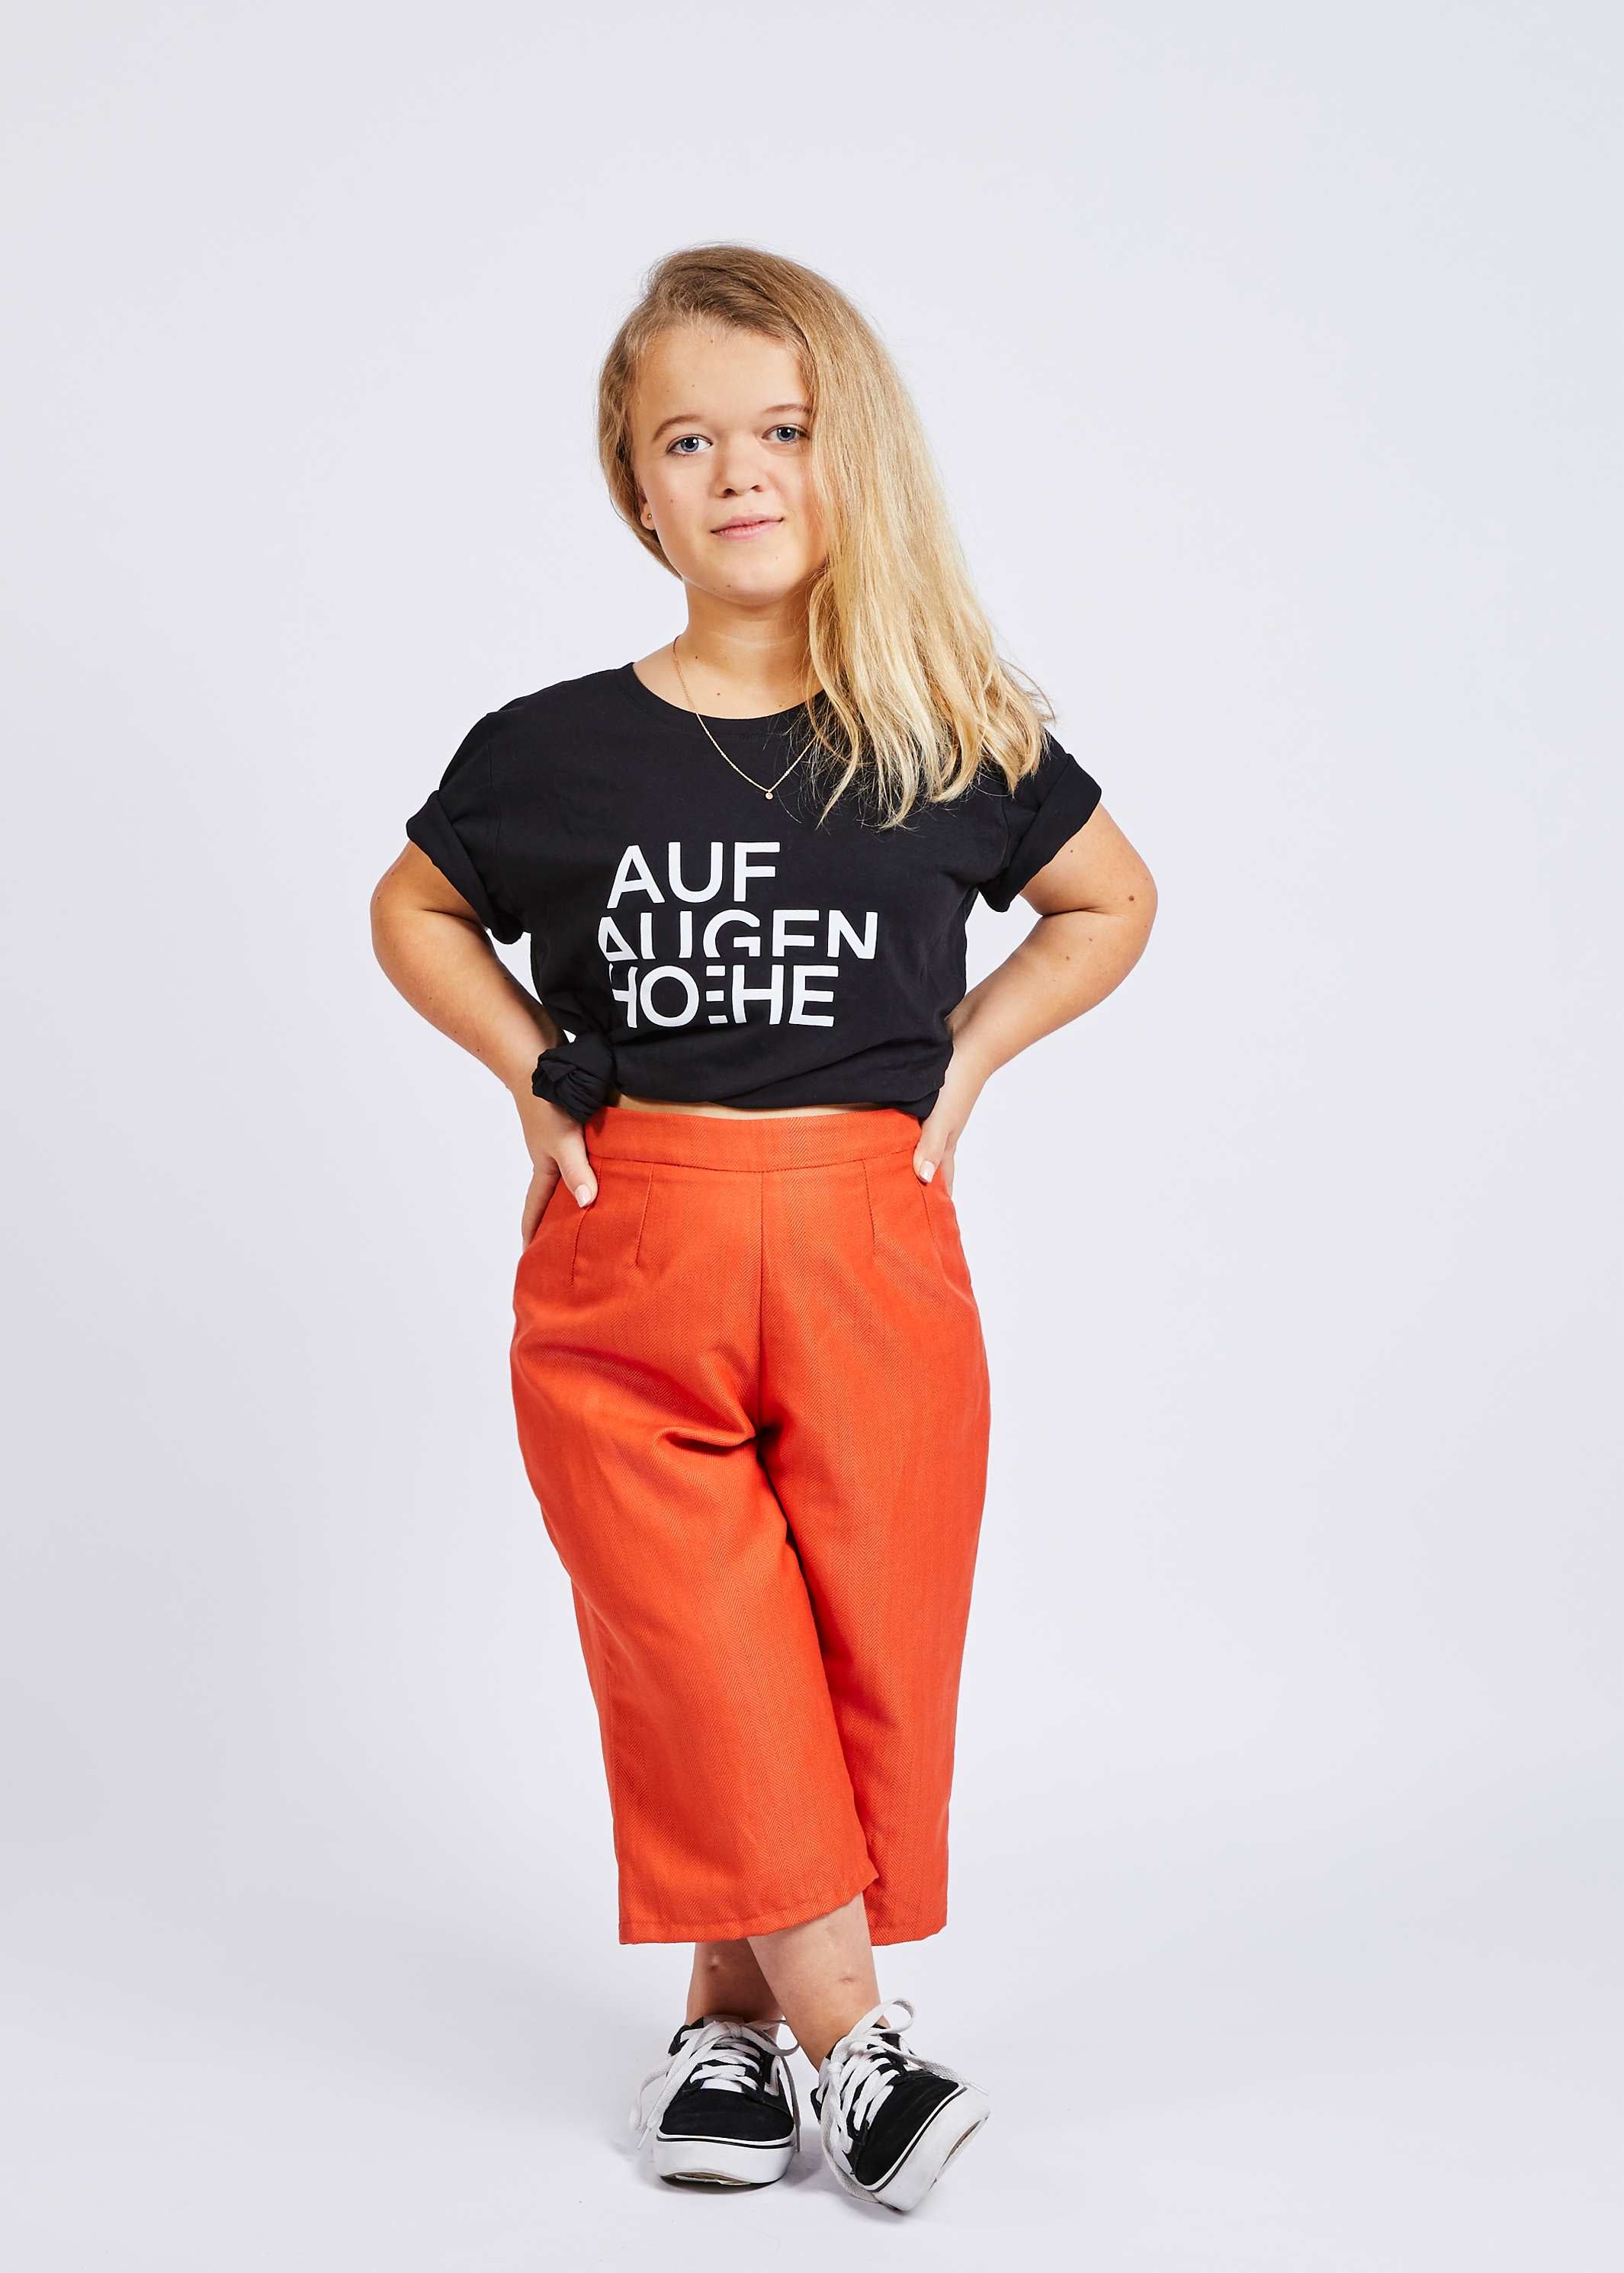 woman with dwarfism wearing red culotte pants and black t-shirt